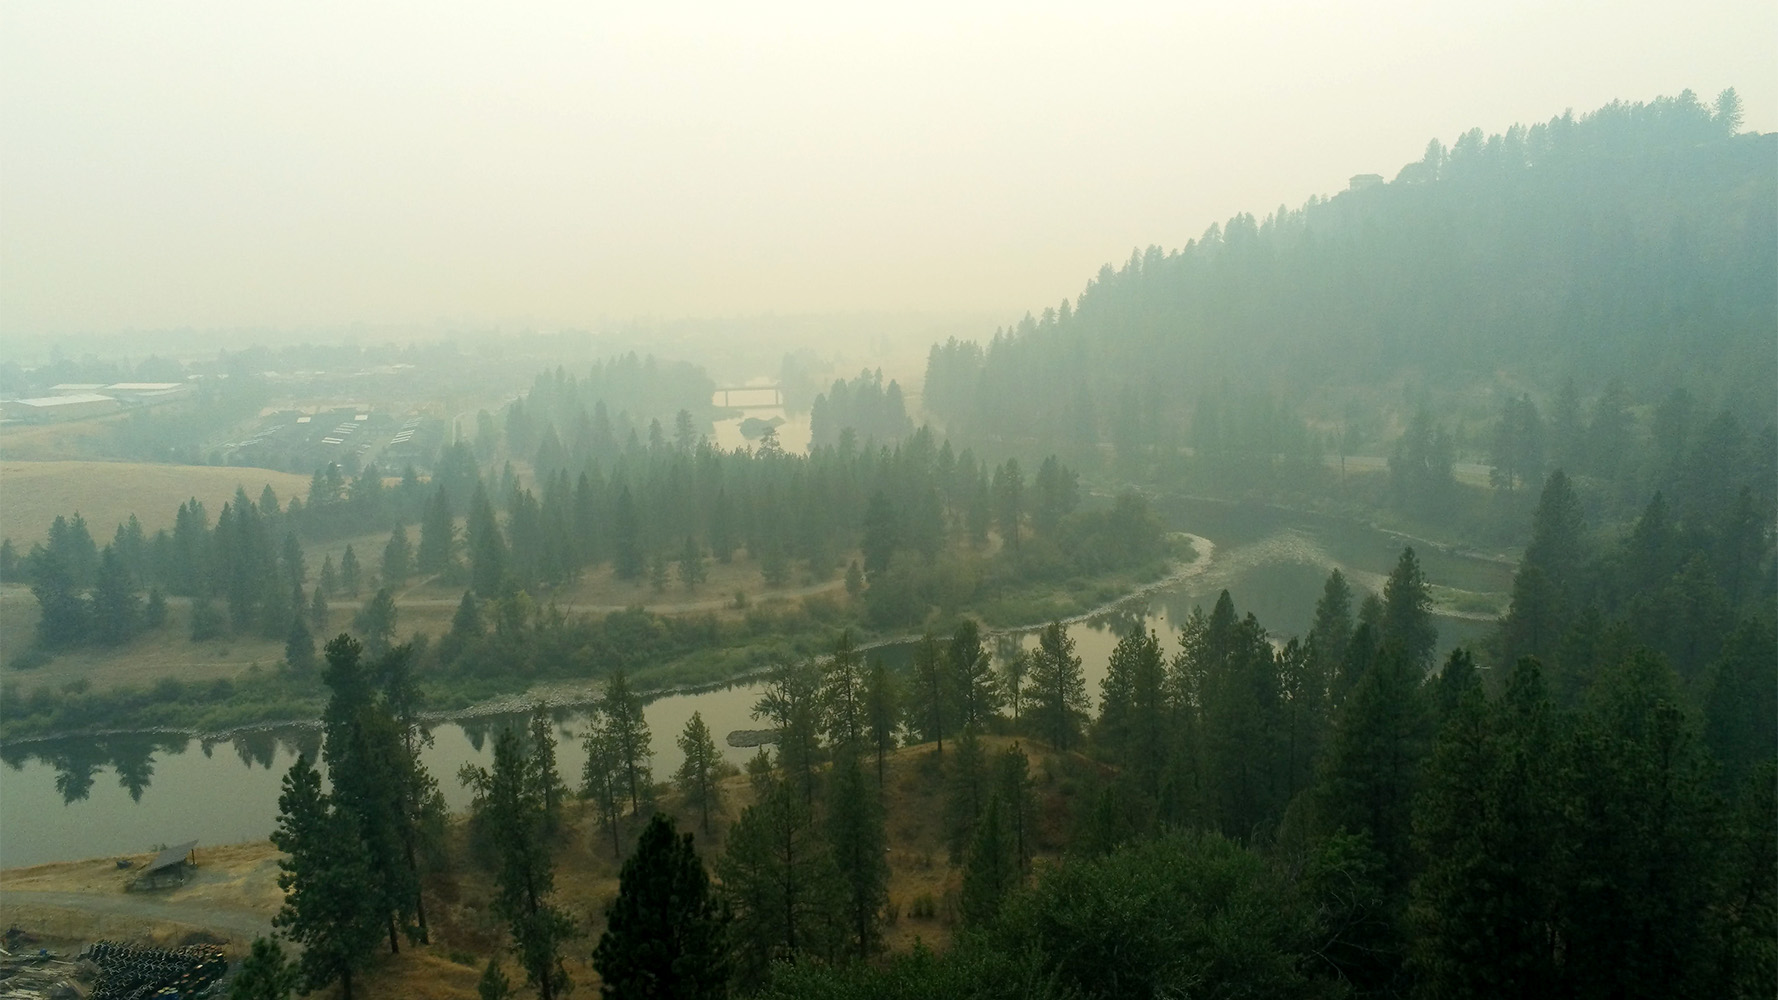 Footage of wildfire smoke over Gonzaga and Upriver